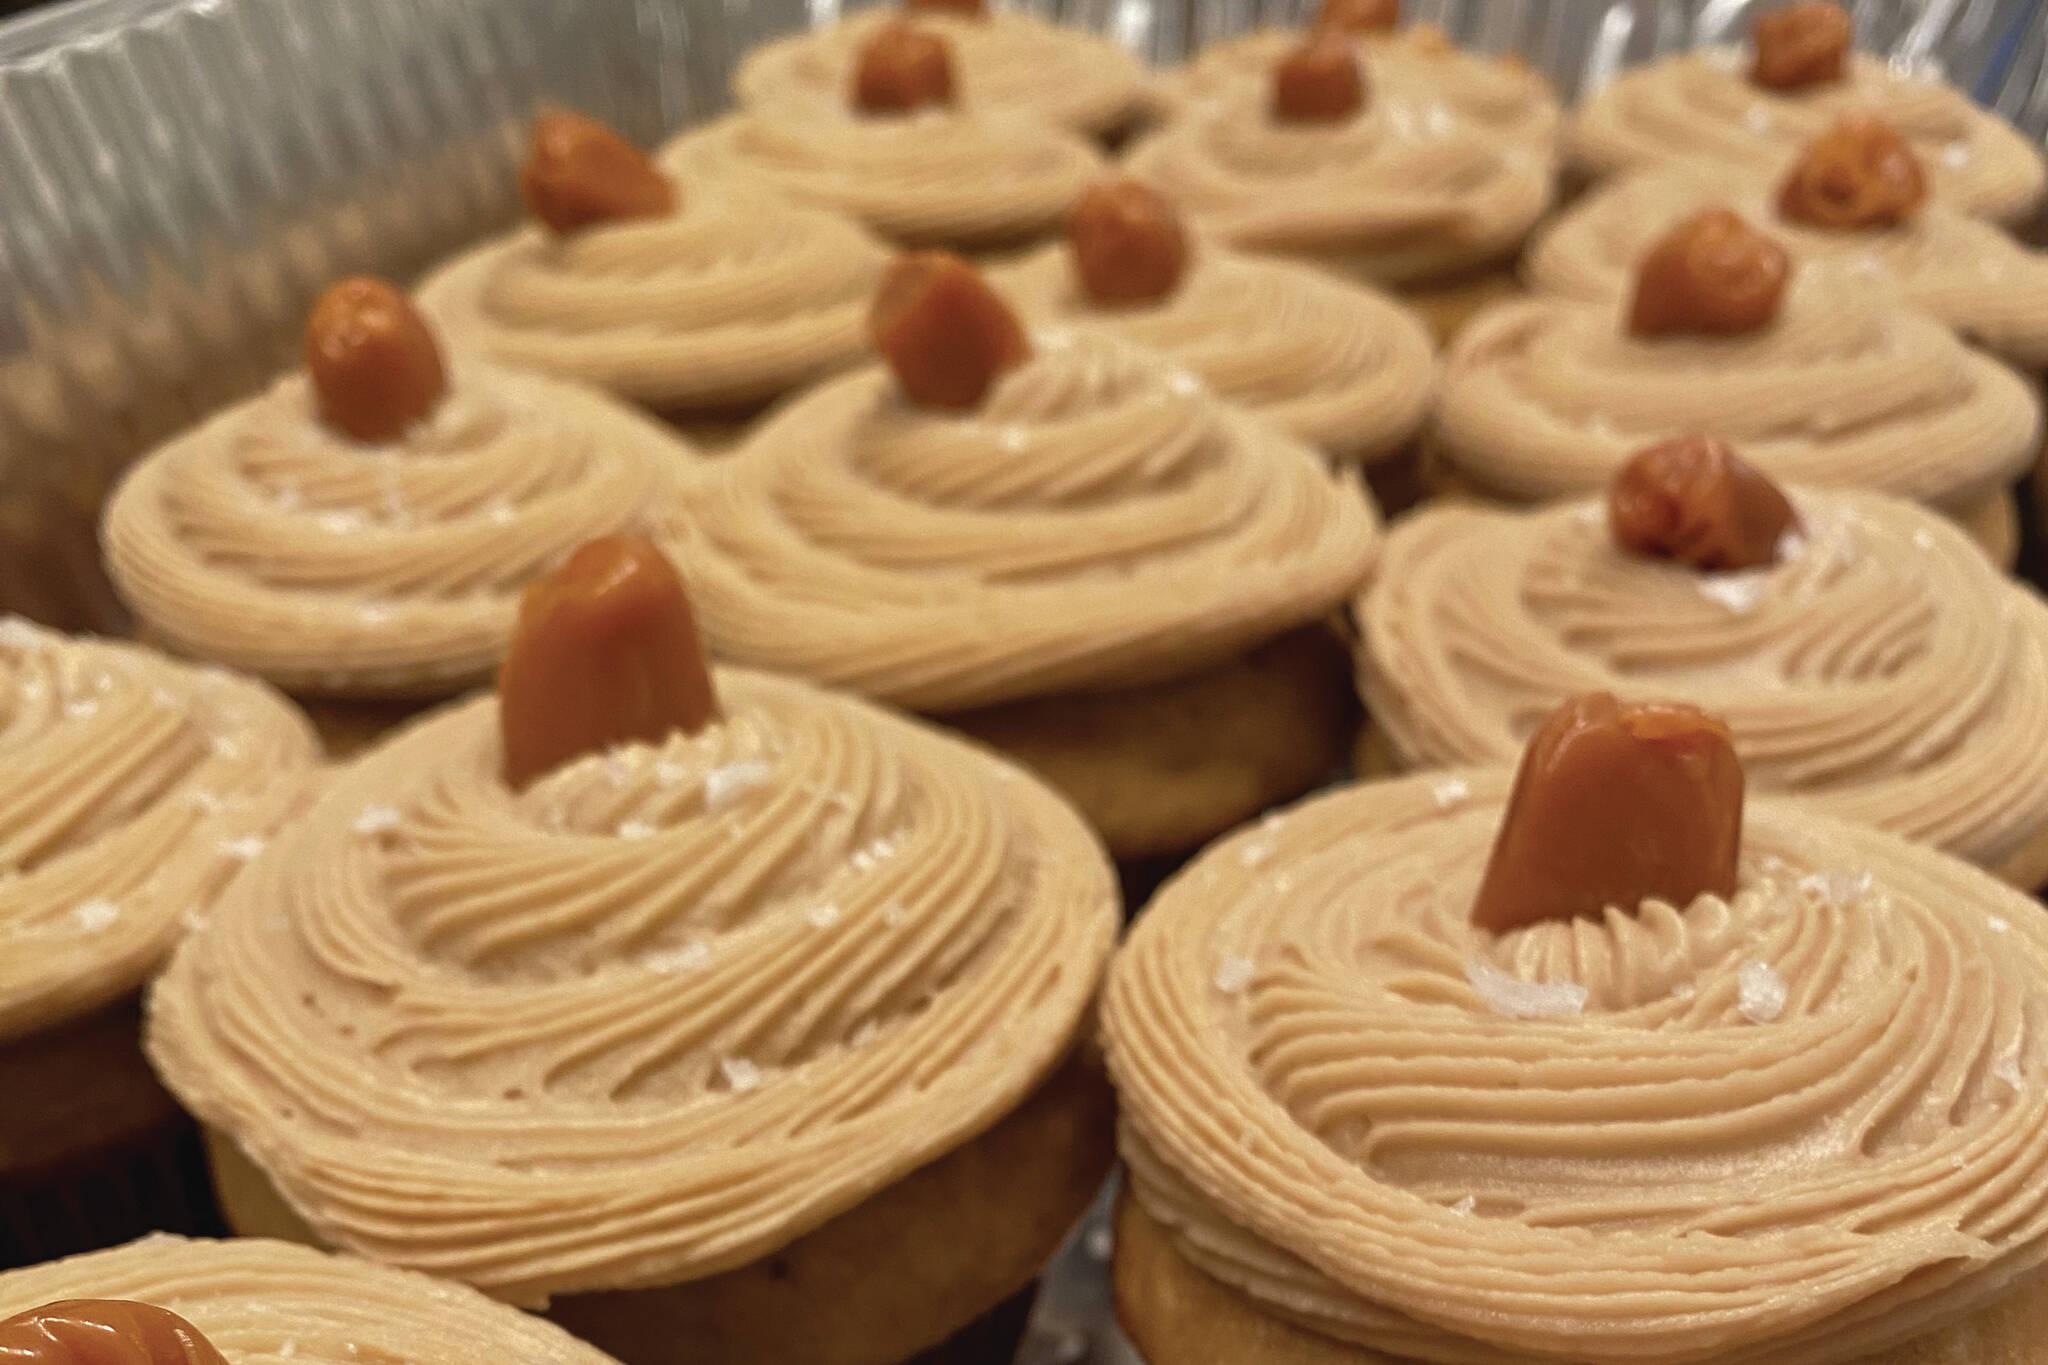 These salted caramel cupcakes topped with caramel candy balance sweetness with Maldon salt. (Photo by Tressa Dale/Peninsula Clarion)